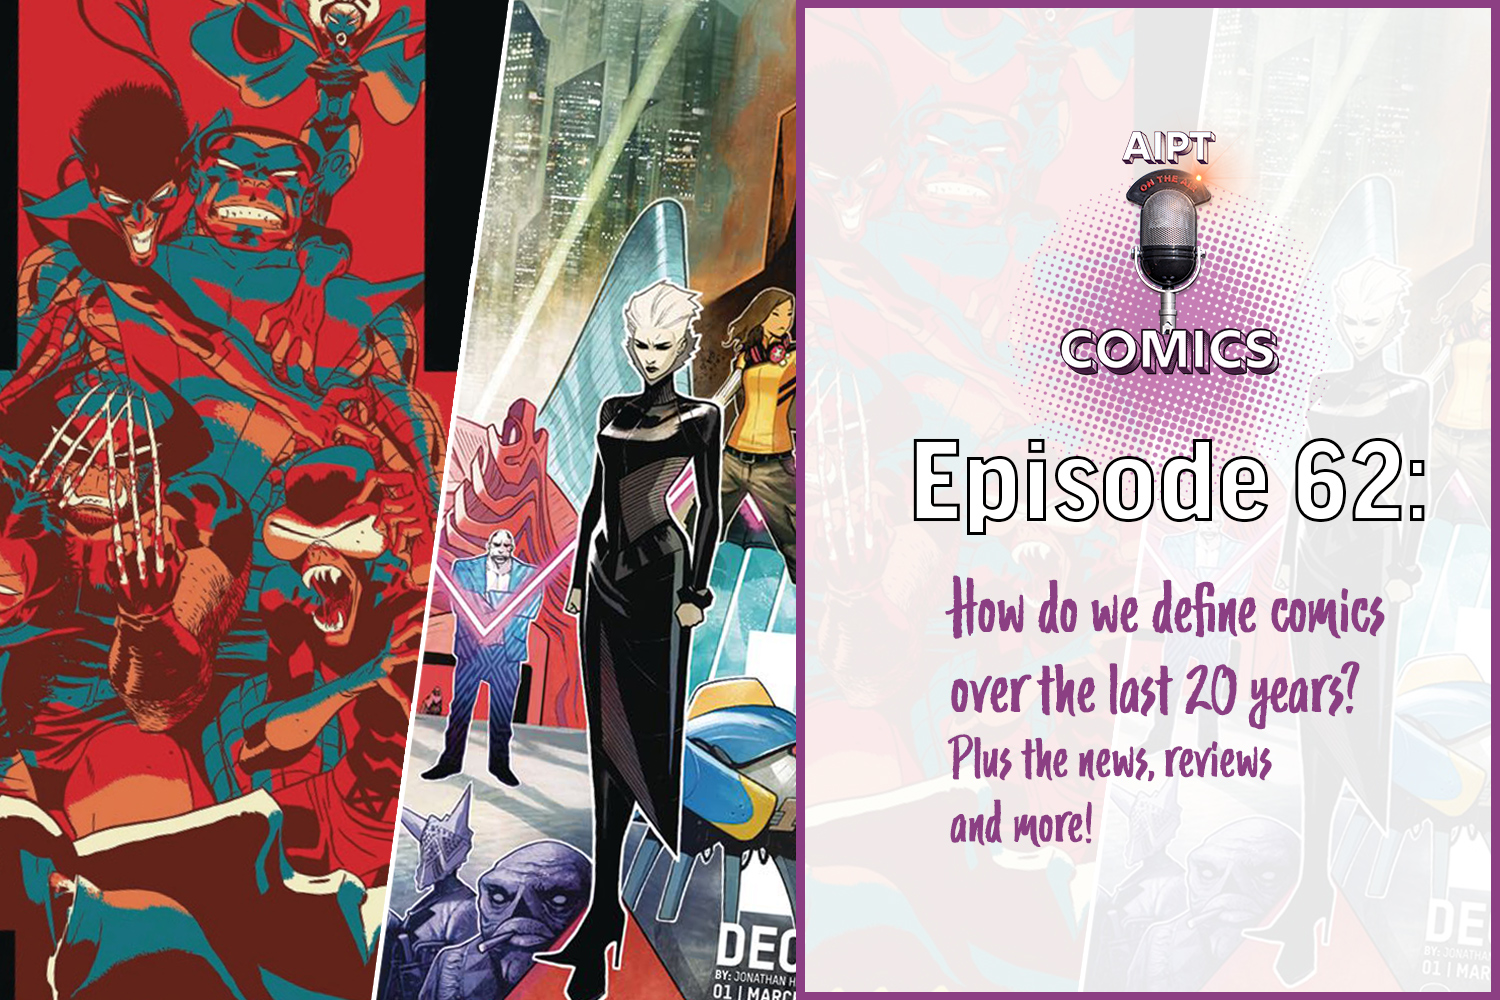 AIPT Comics Podcast Episode 62: How do we define comics over the last 20 years?